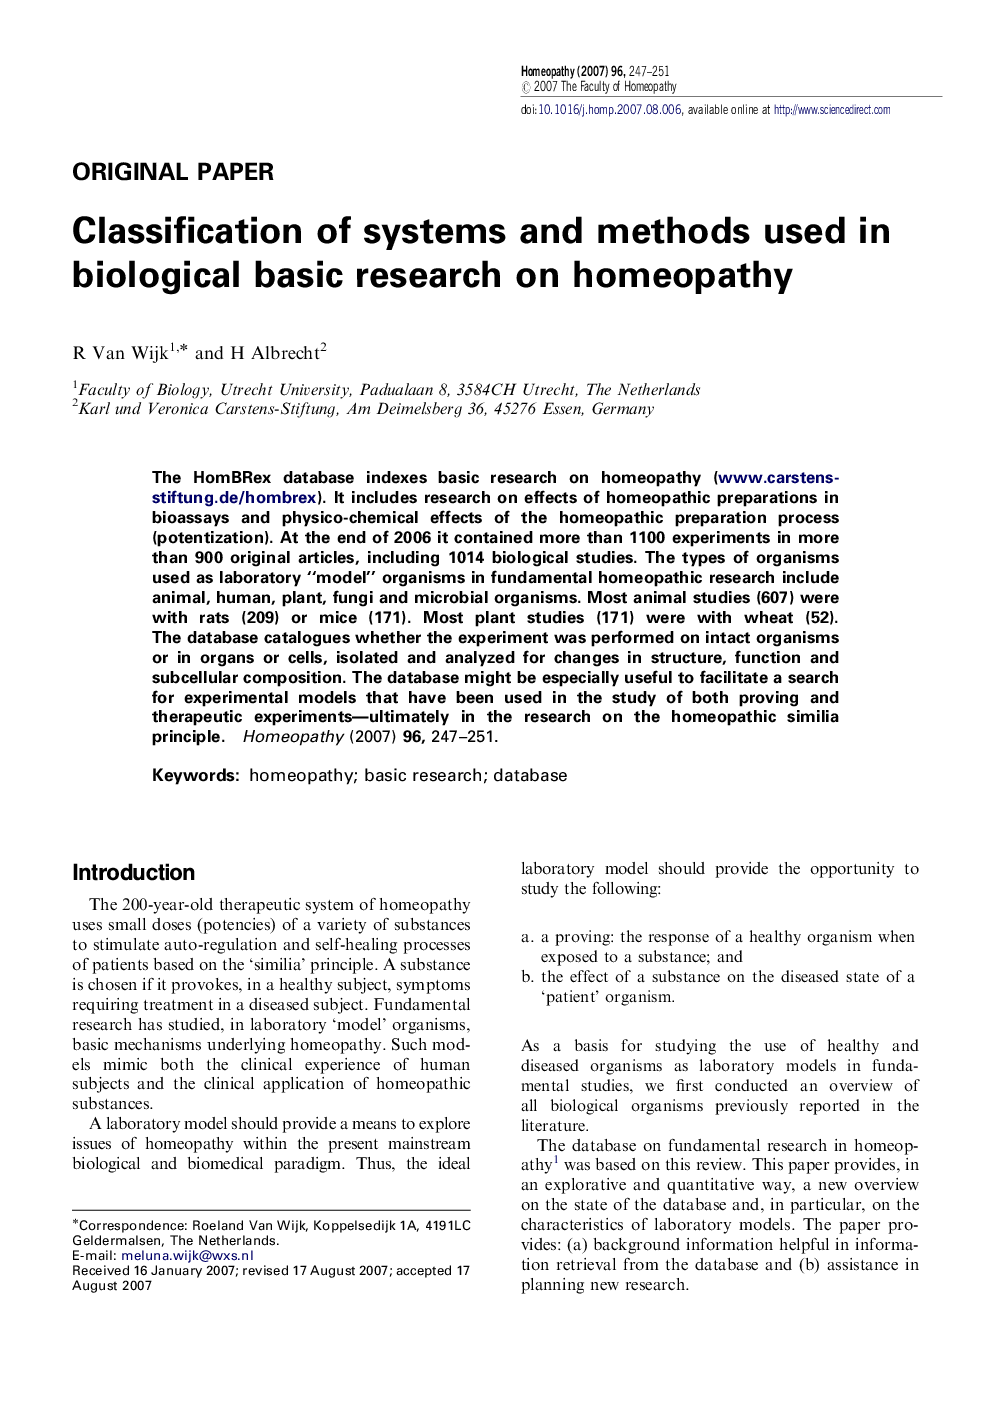 Classification of systems and methods used in biological basic research on homeopathy